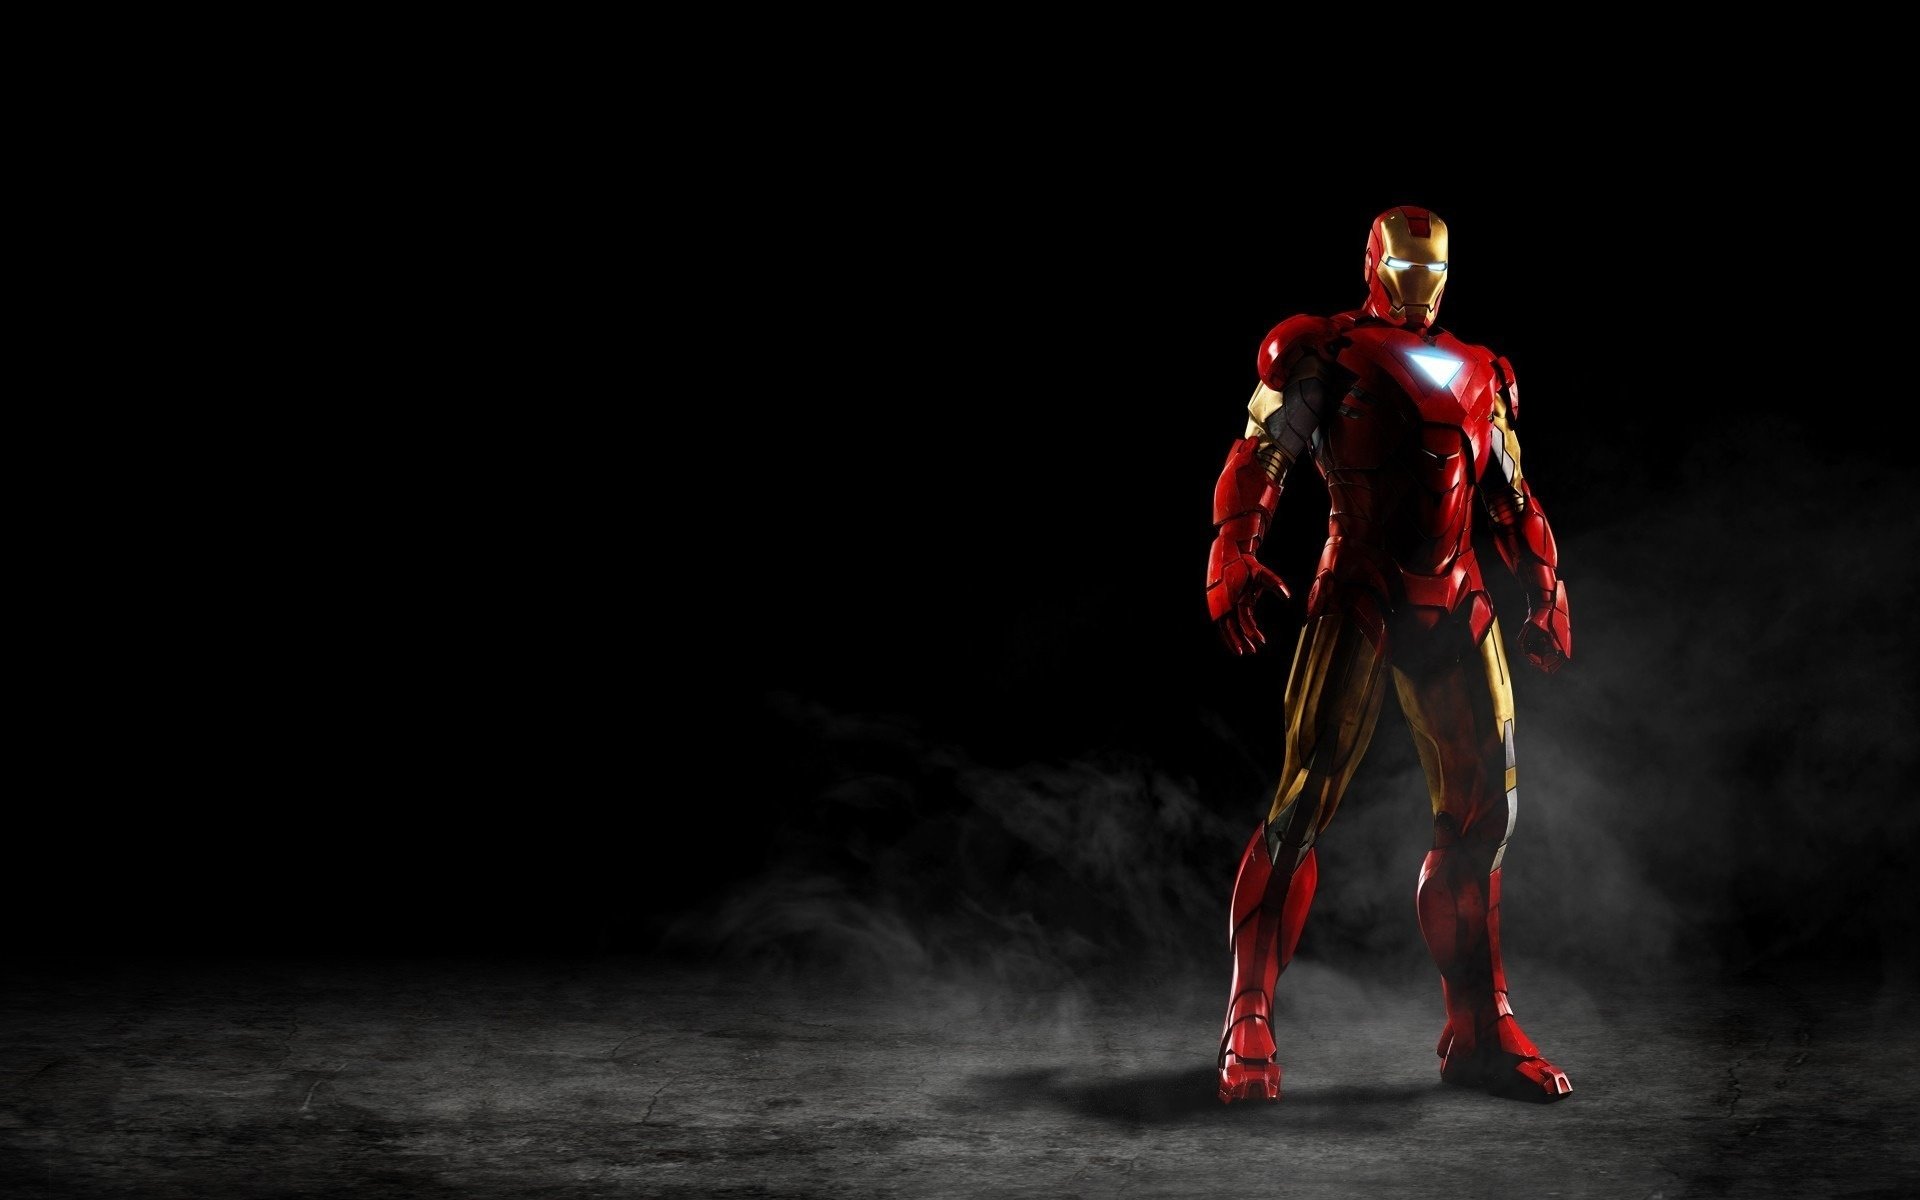 of Iron 4K wallpaper for your desktop or mobile screen